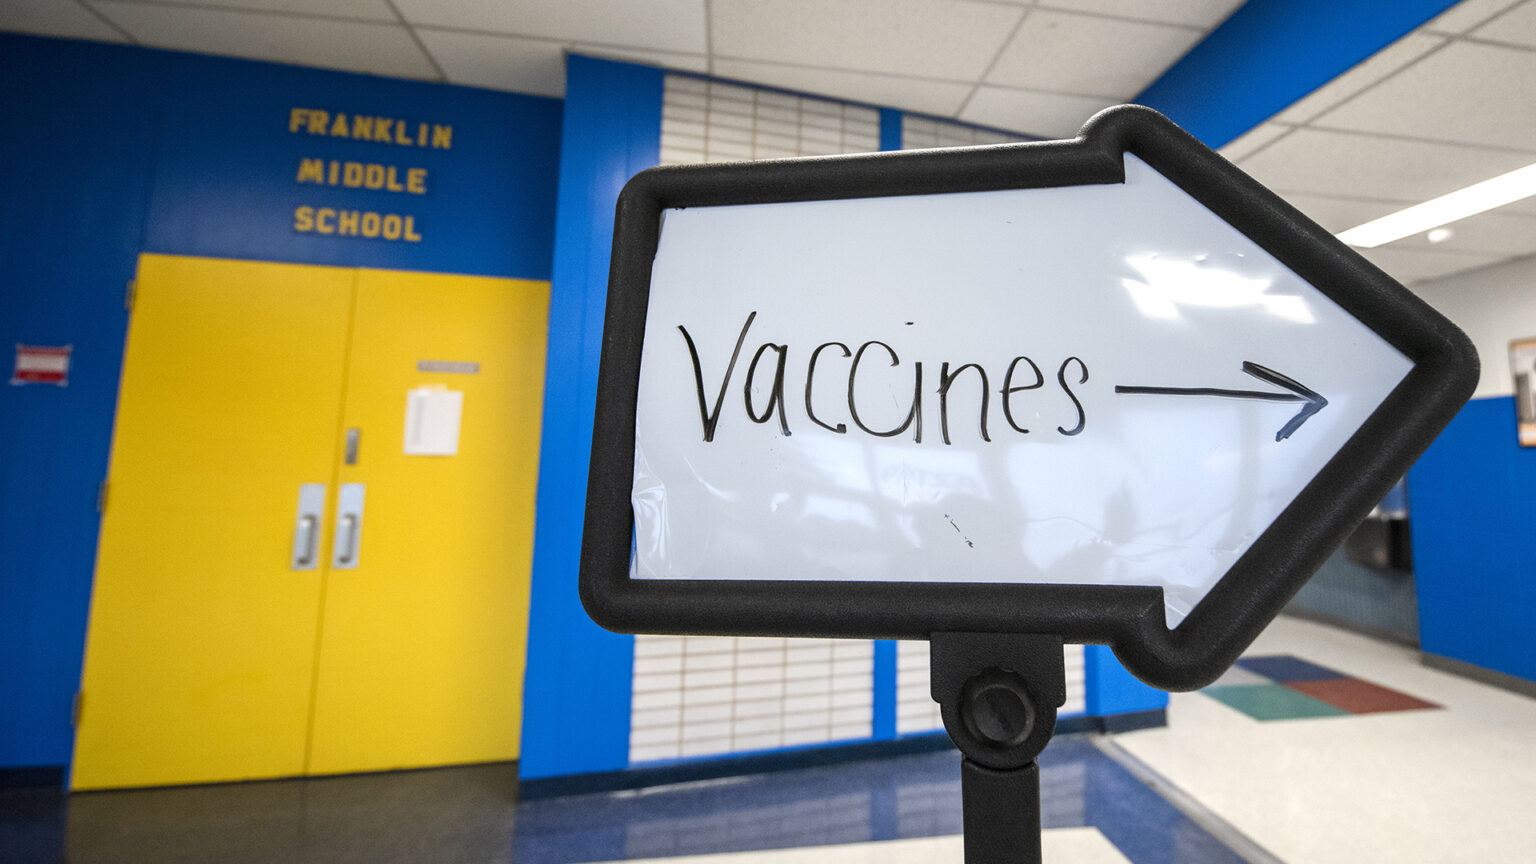 A whiteboard in the shape of an arrow with Vaccines and an arrow written on it stands in a school hallway.